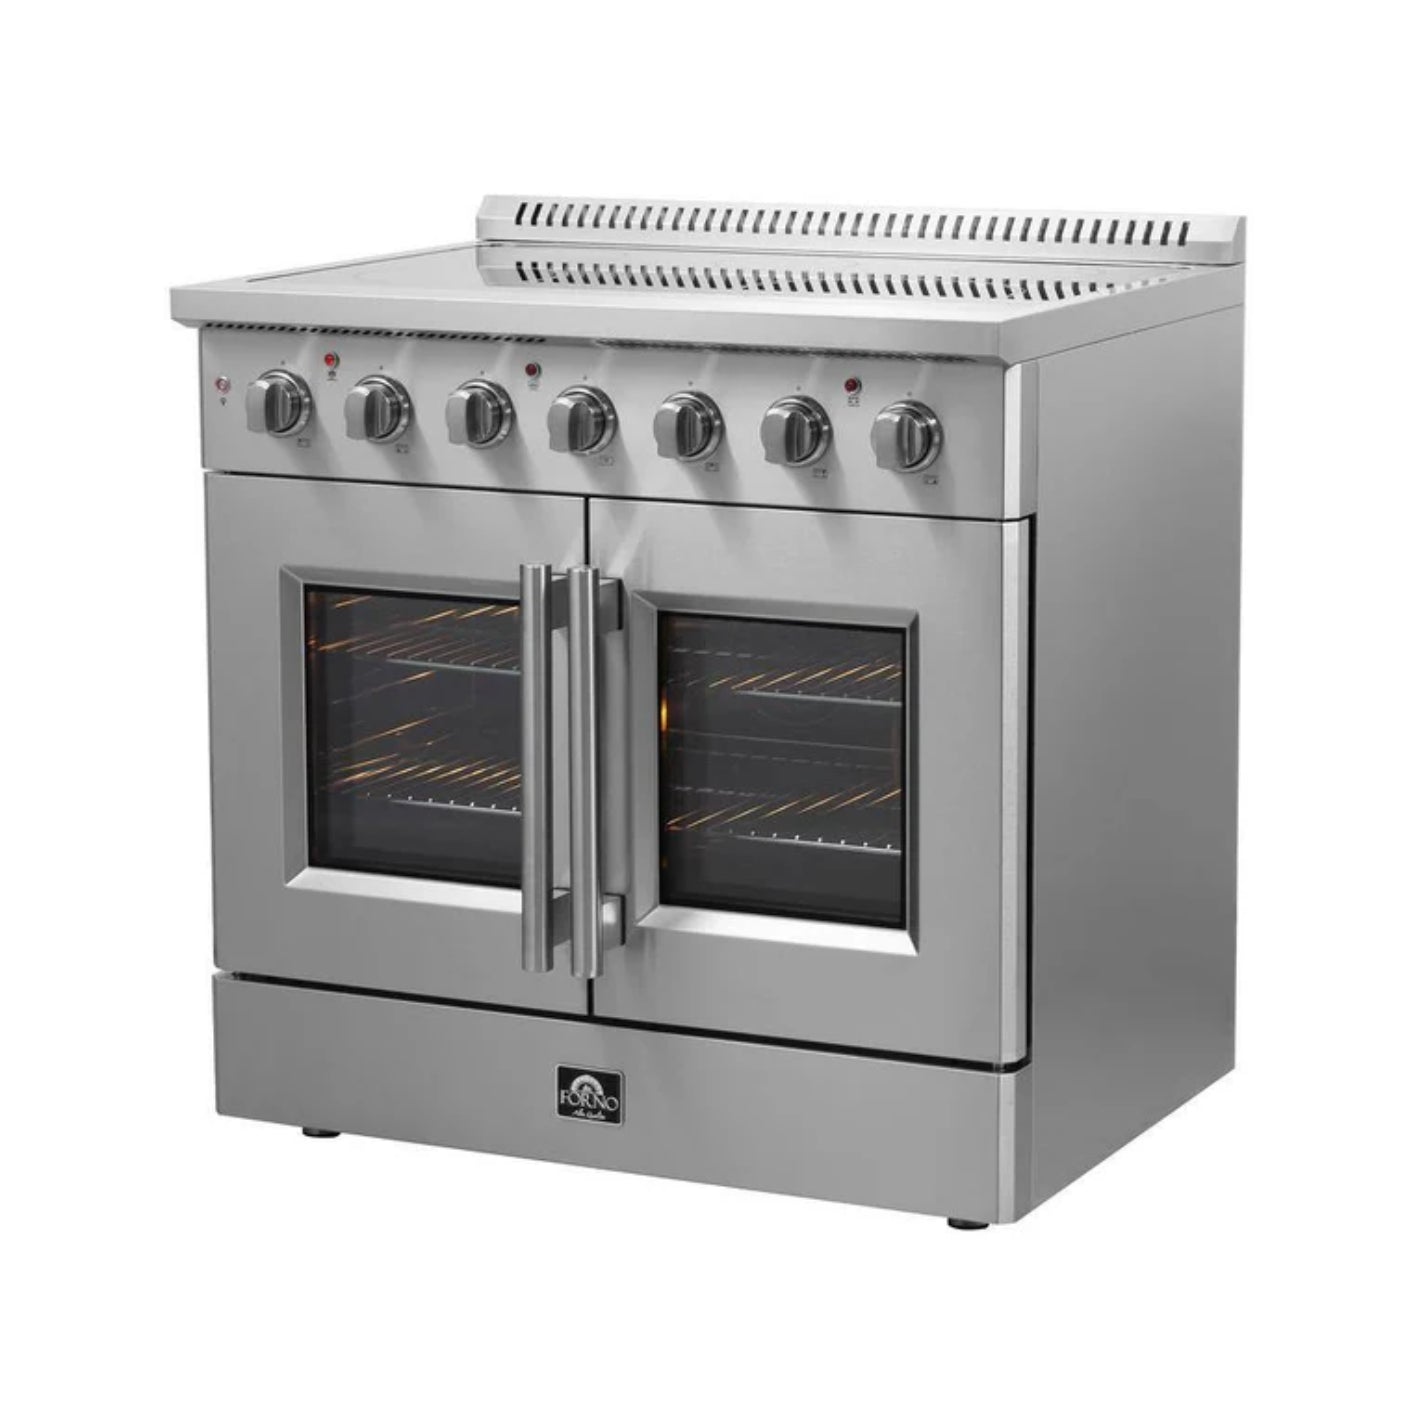 Forno Galiano 36-inch French Door Electric Range Stainless Steel, 5 Elements, FFSEL6917-36